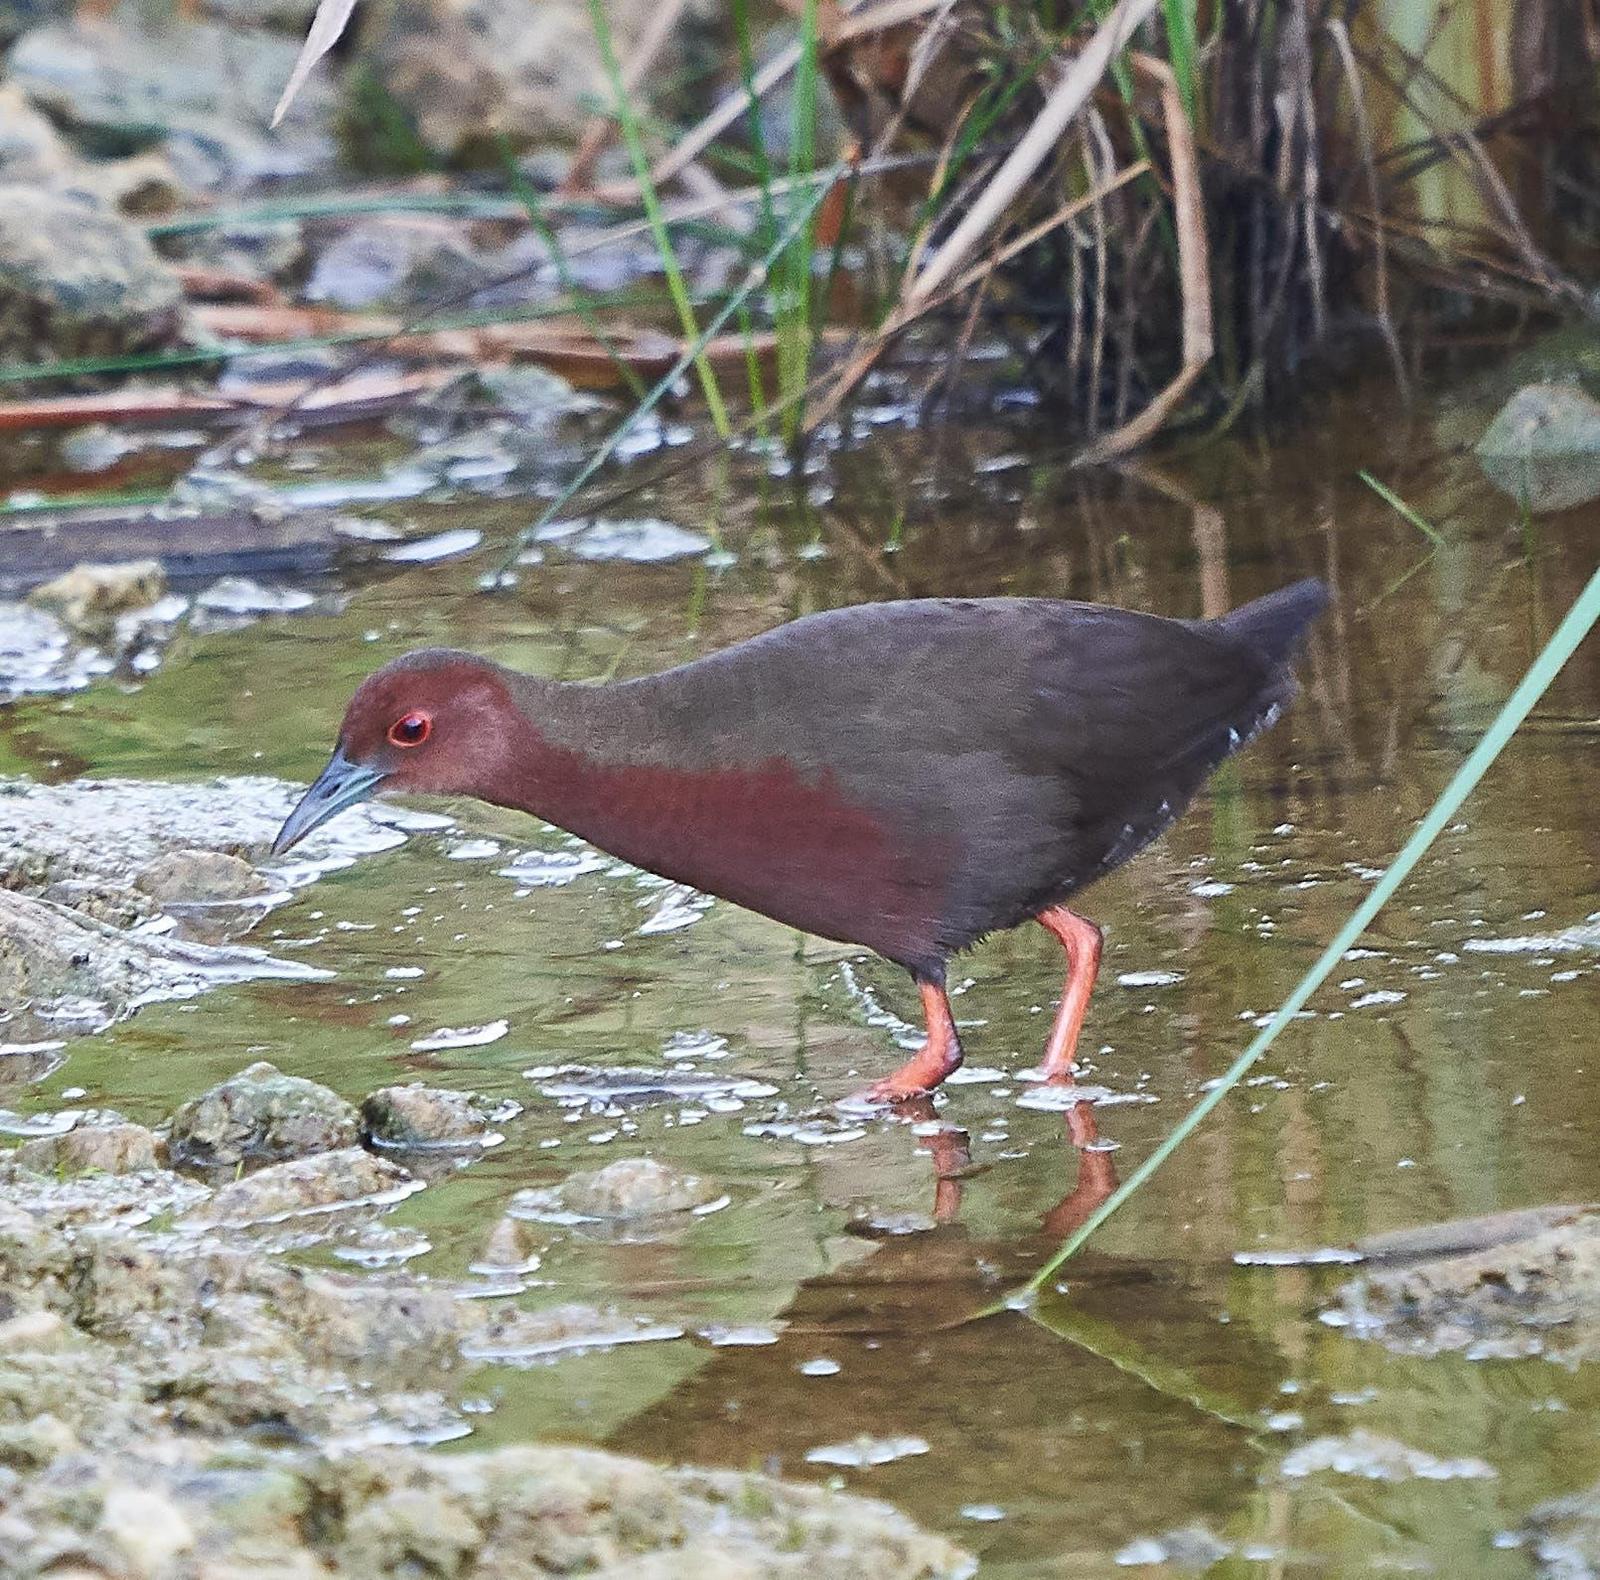 Ruddy-breasted Crake Photo by Steven Cheong